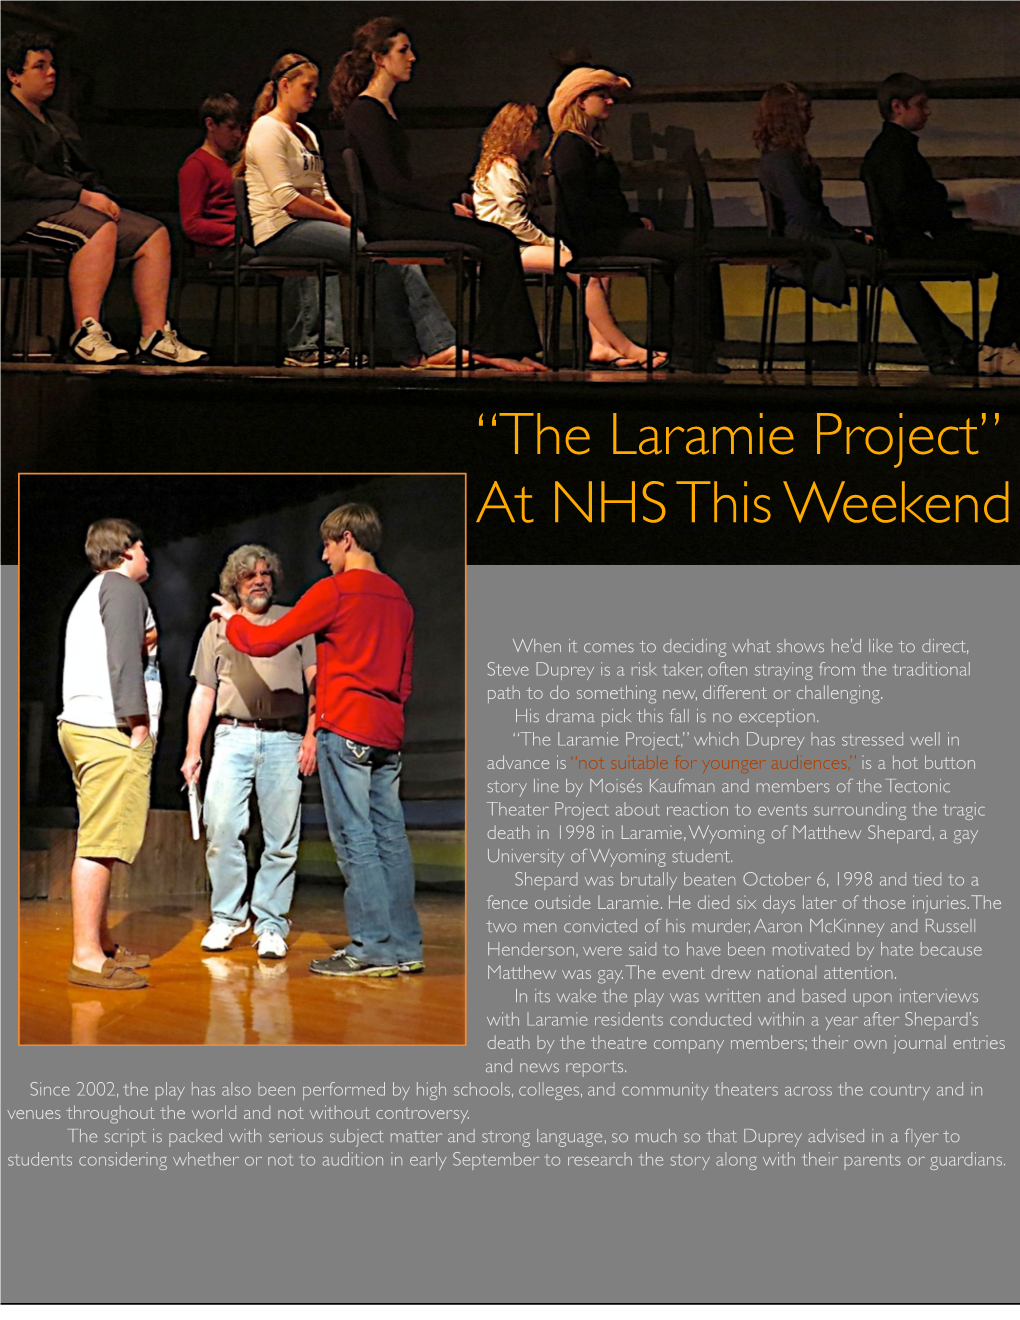 The Laramie Project” at NHS This Weekend